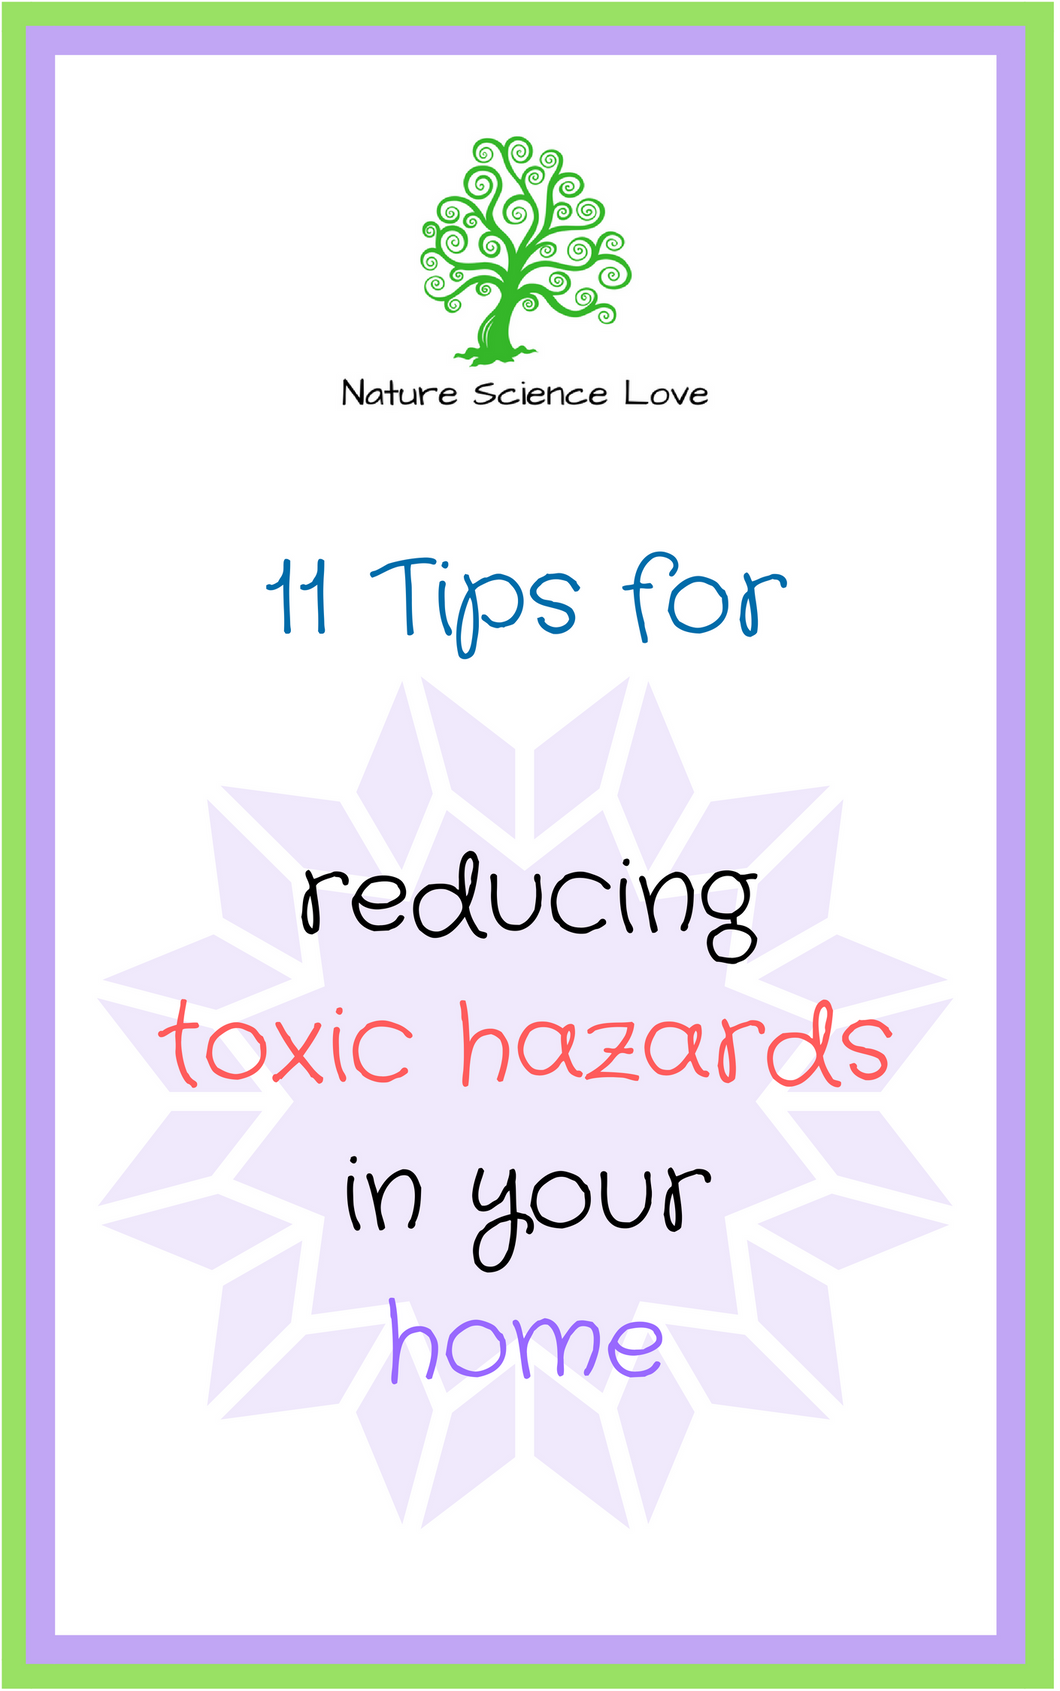 FREE Guide: 11 Tips for reducing toxic hazards in your home (E-book)